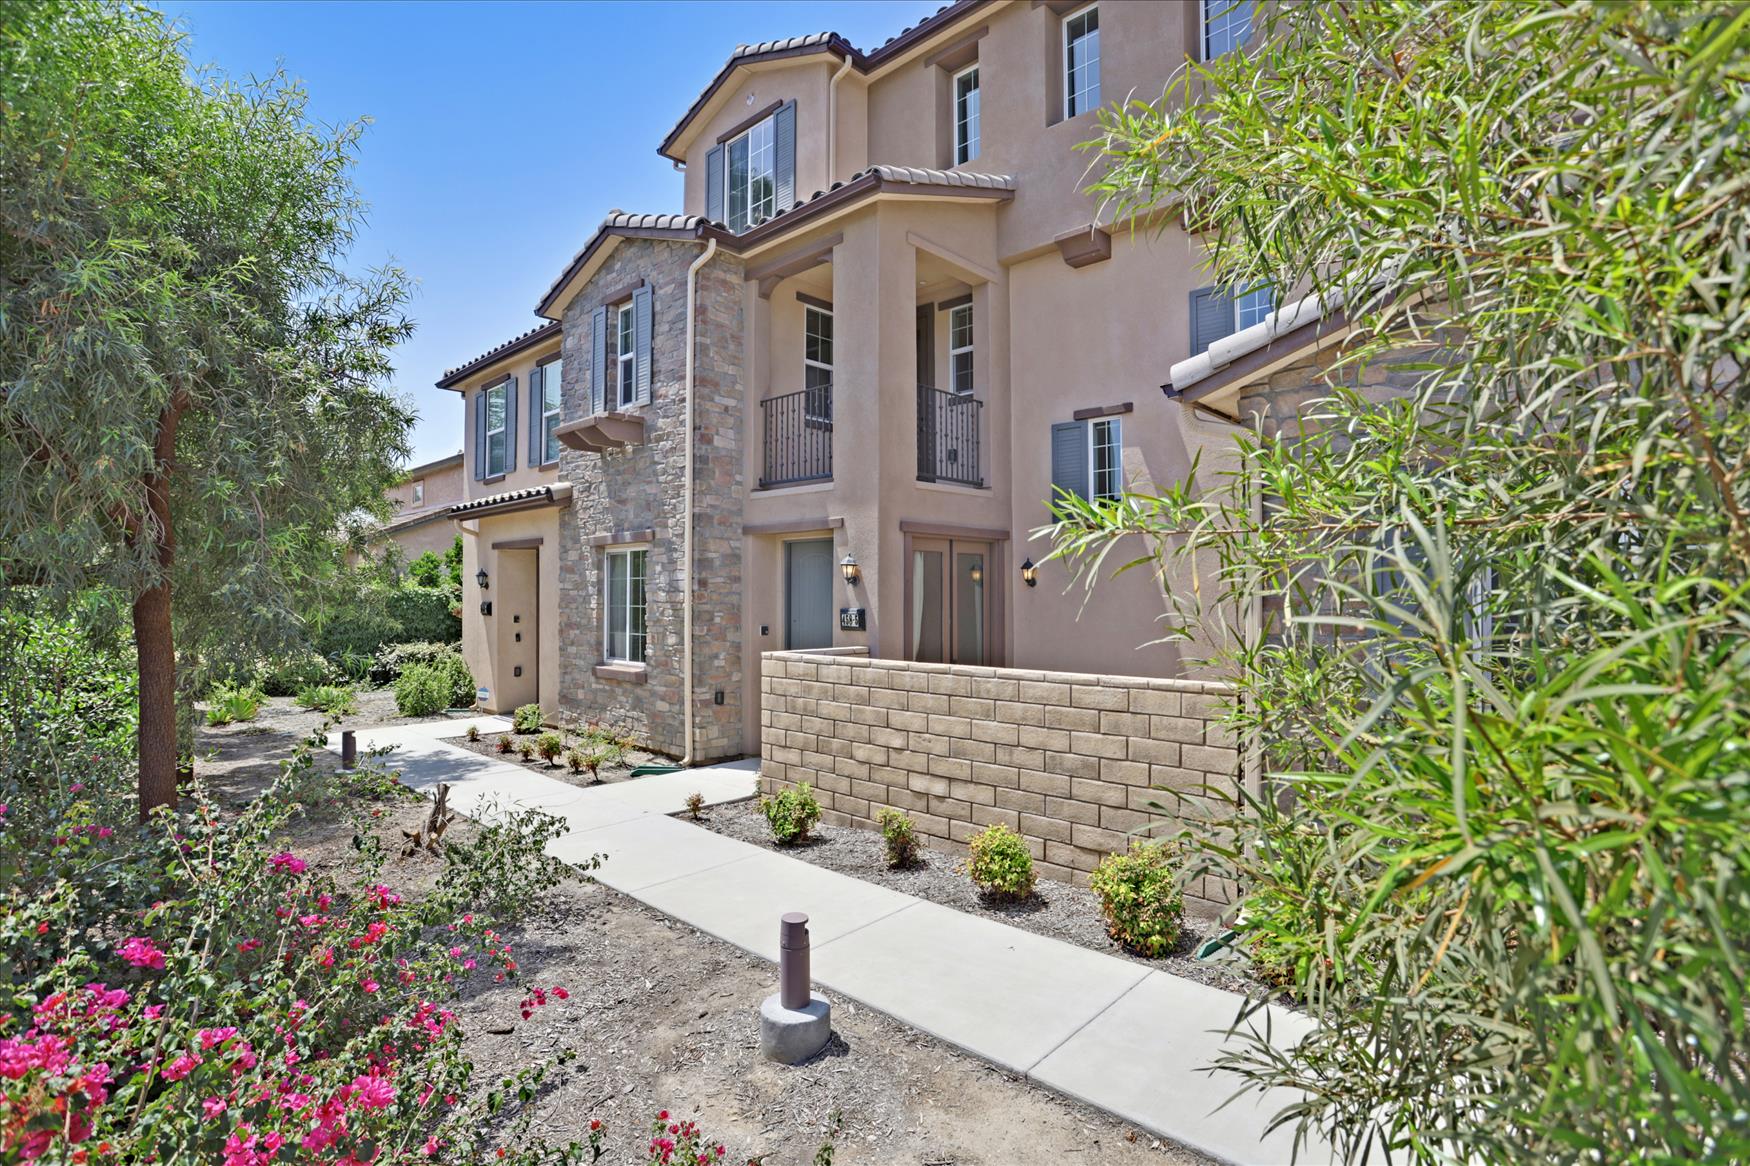 Beautiful Simi Valley, CA house showcasing the best property management services